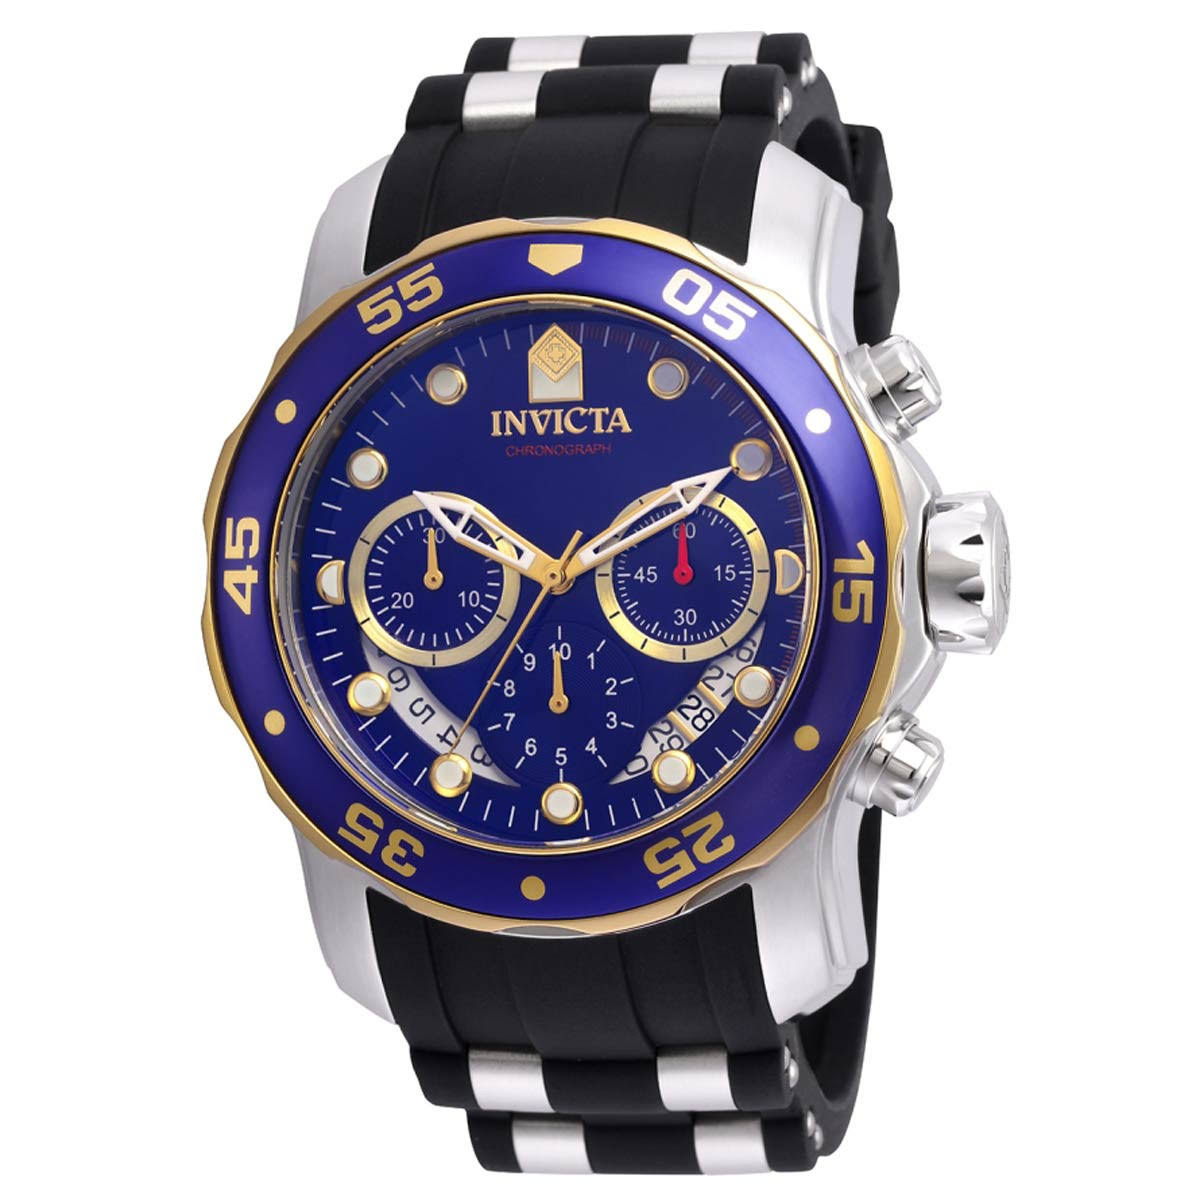 Invicta Men's 'Pro Diver' Quartz Stainless Steel and Silicone Casual Watch, Color:Black (Model: 22971)